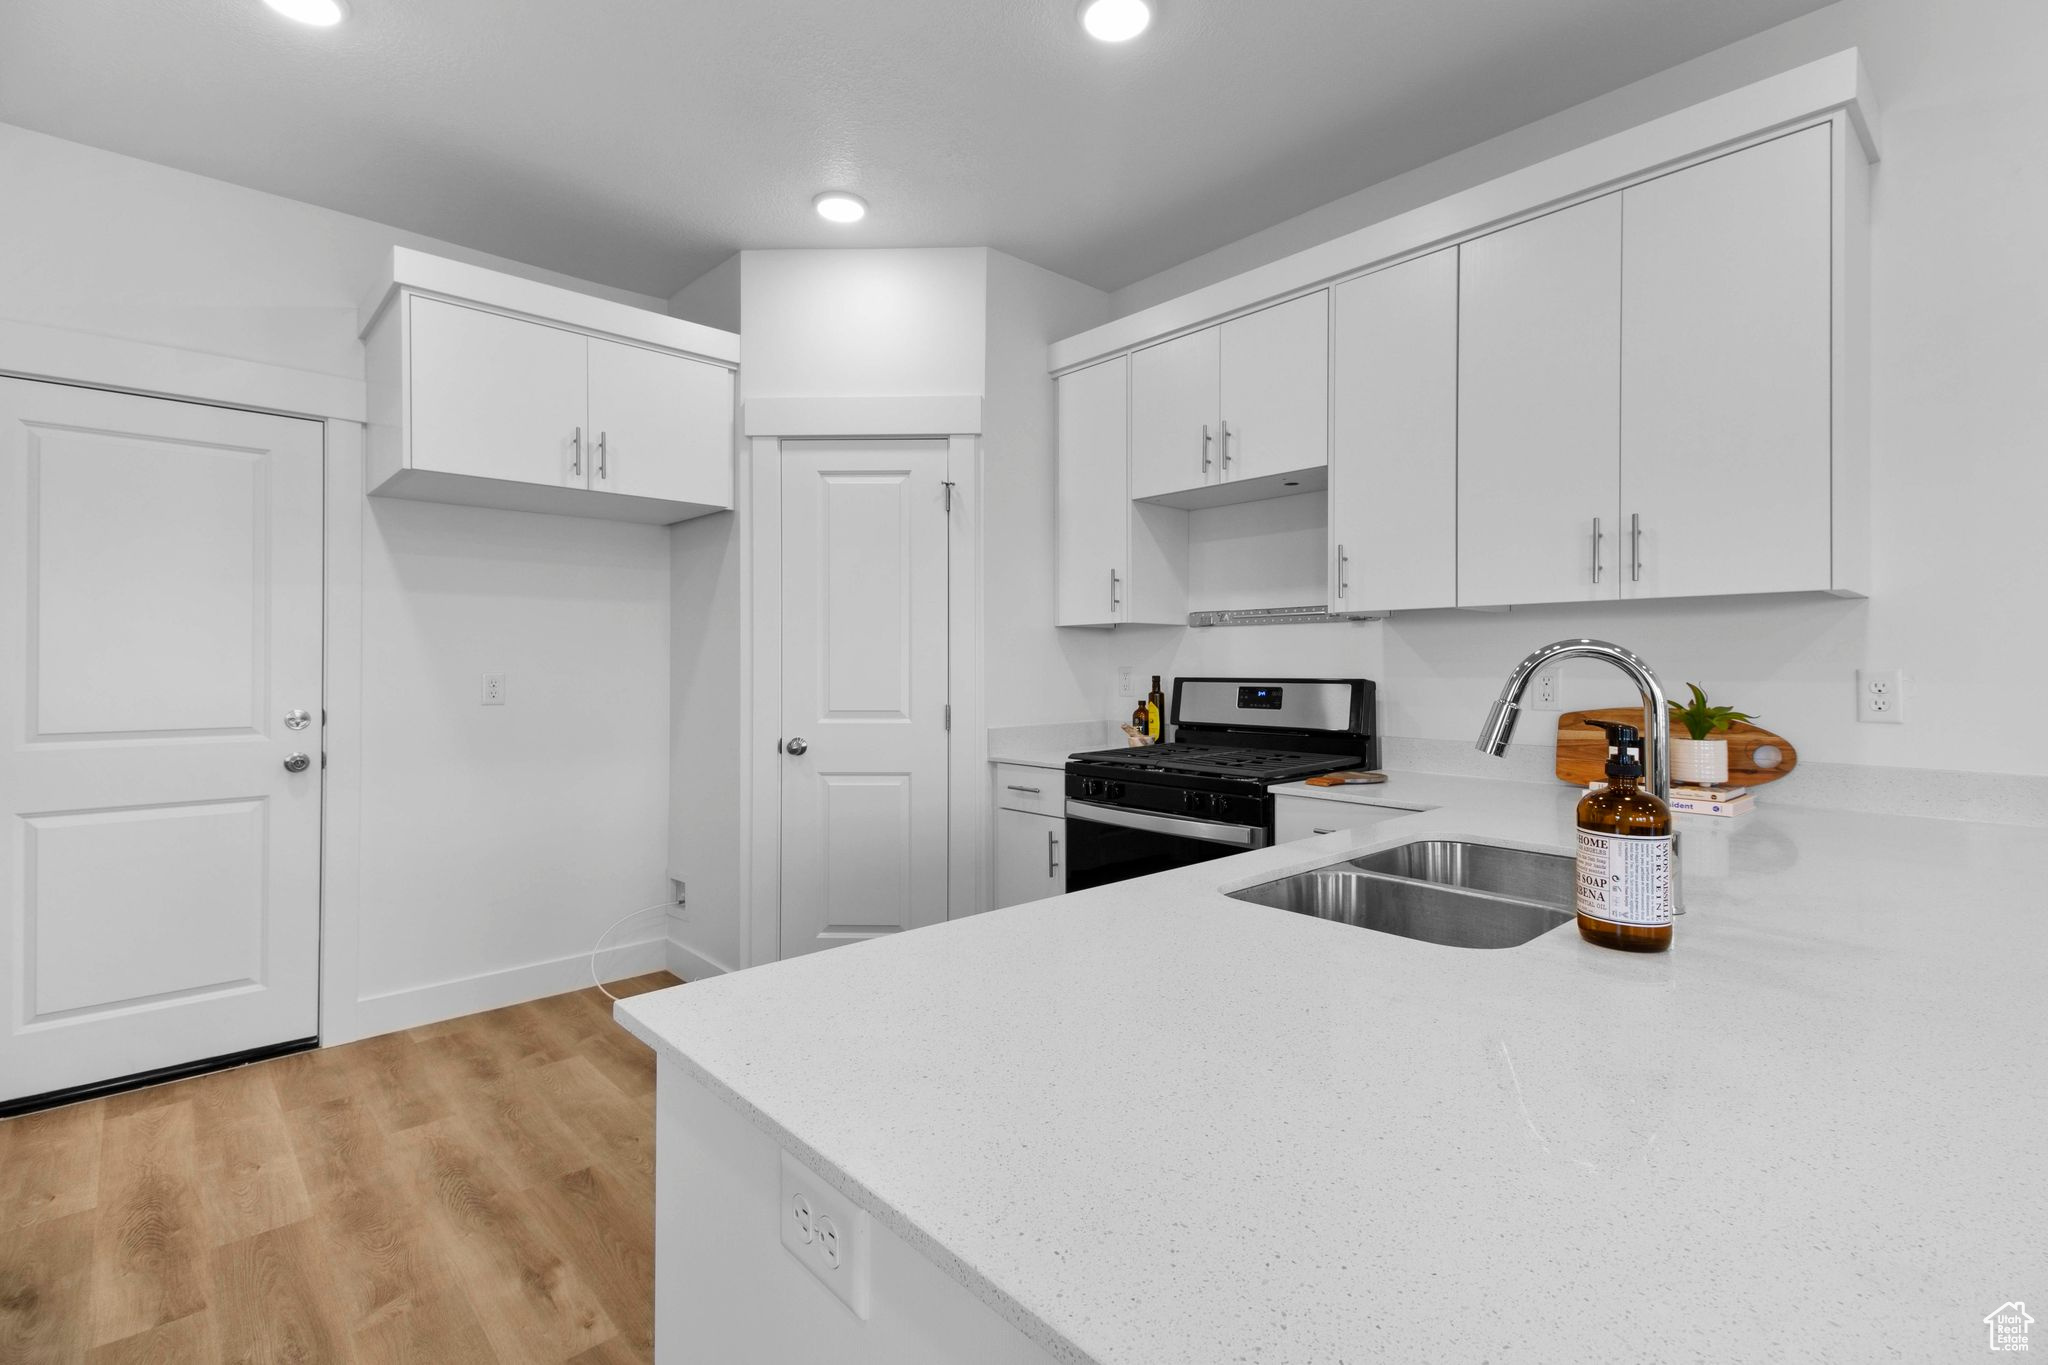 Kitchen featuring white cabinetry, light hardwood / wood-style flooring, sink, and stainless steel gas range